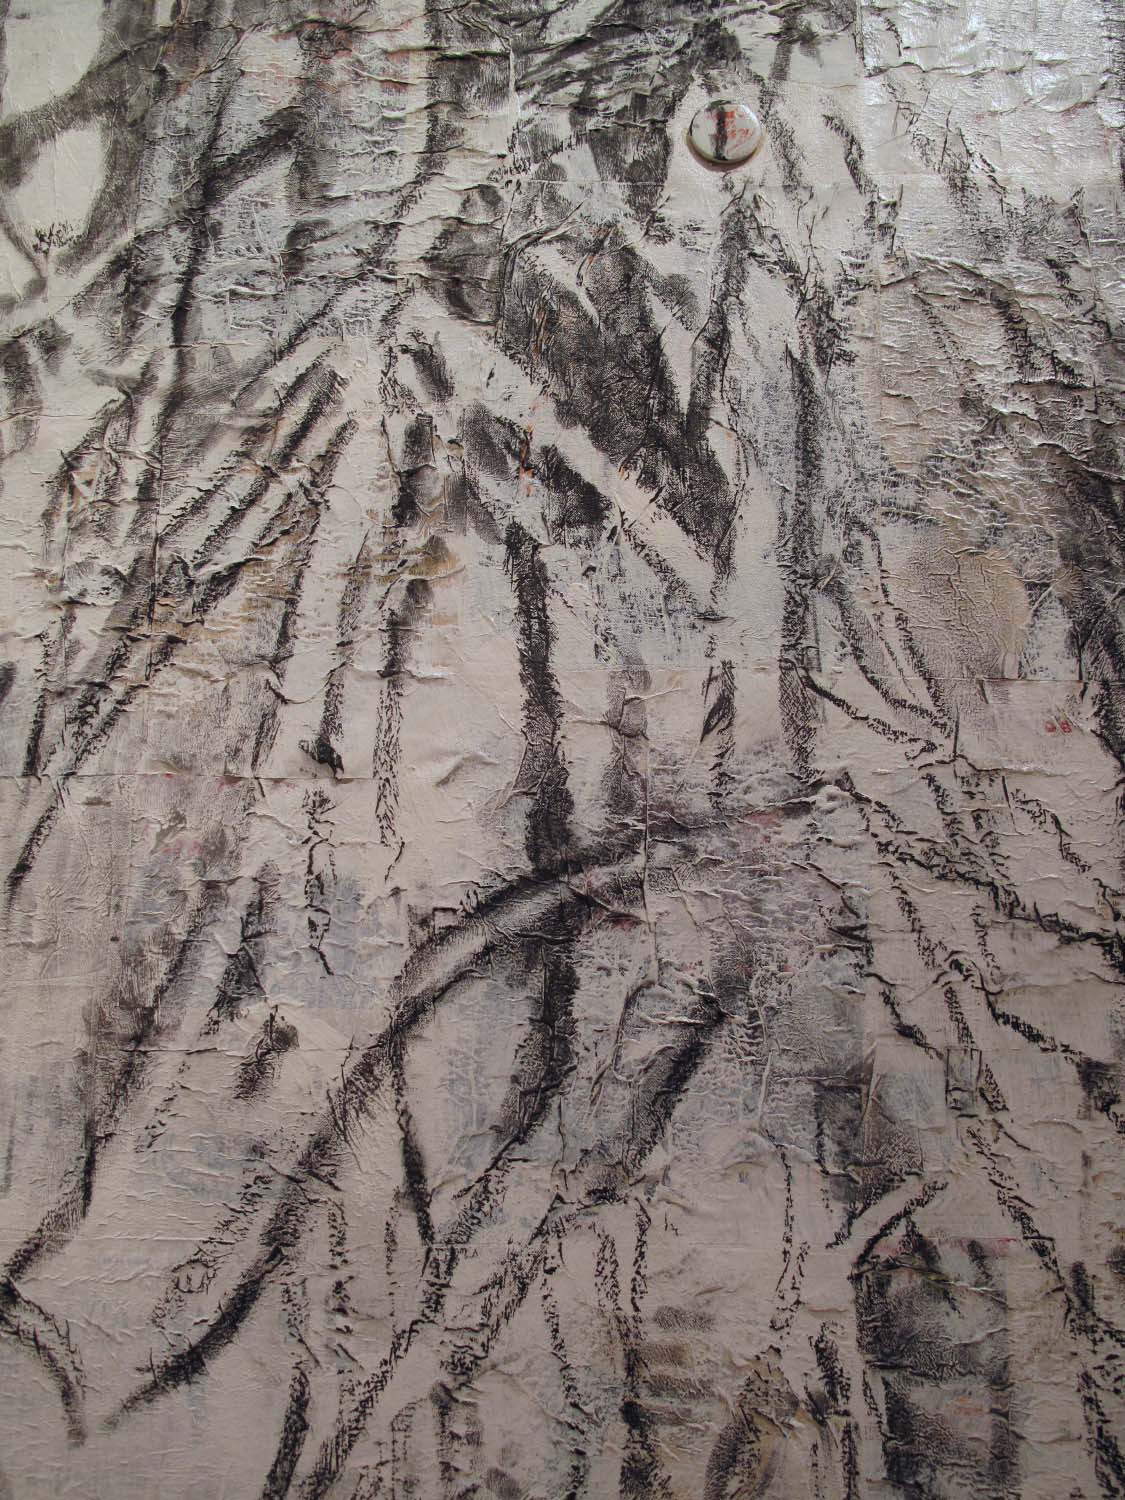 2ah(1)-Detail of Shrub, charcoal, gesso, collage on canvas.jpg